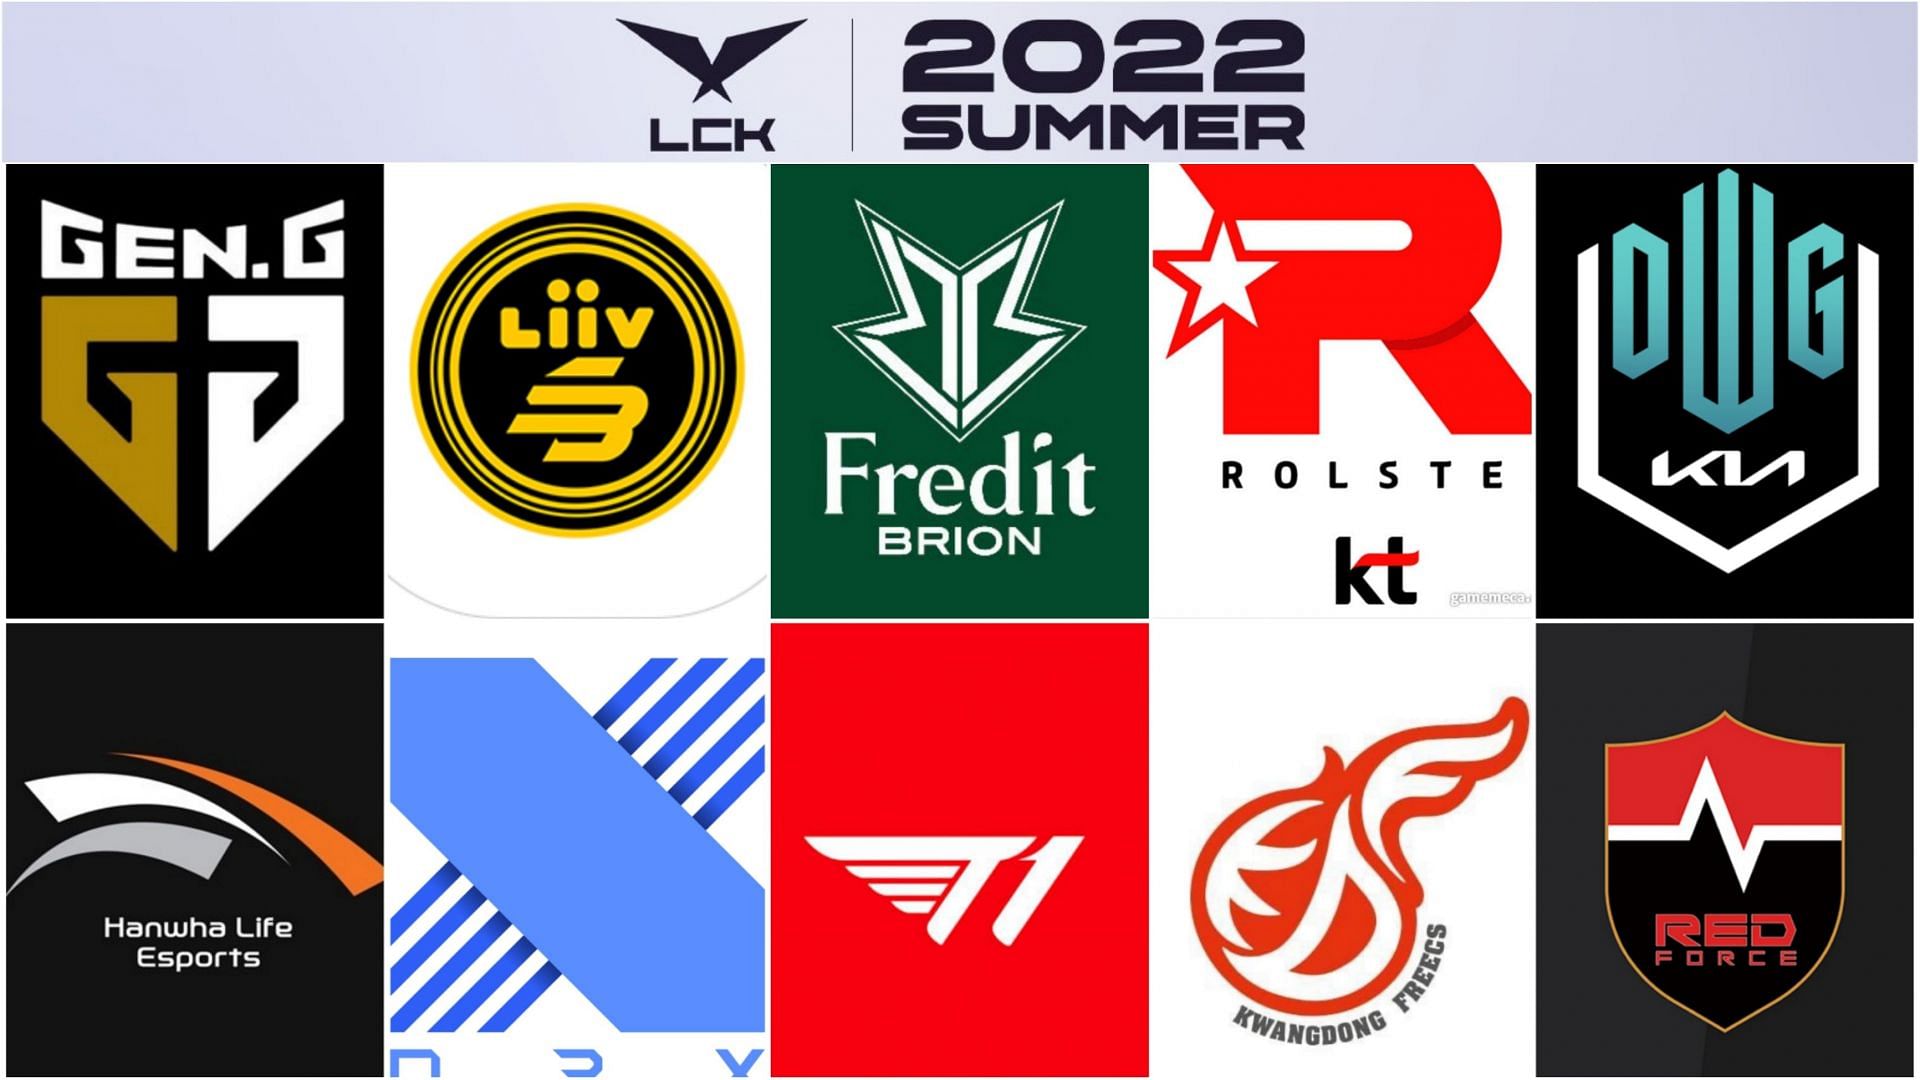 Top 10 South Korean League of Legends pro teams will be competing in LCK 2022 Summer, starting from June 15 (Image via LCK)